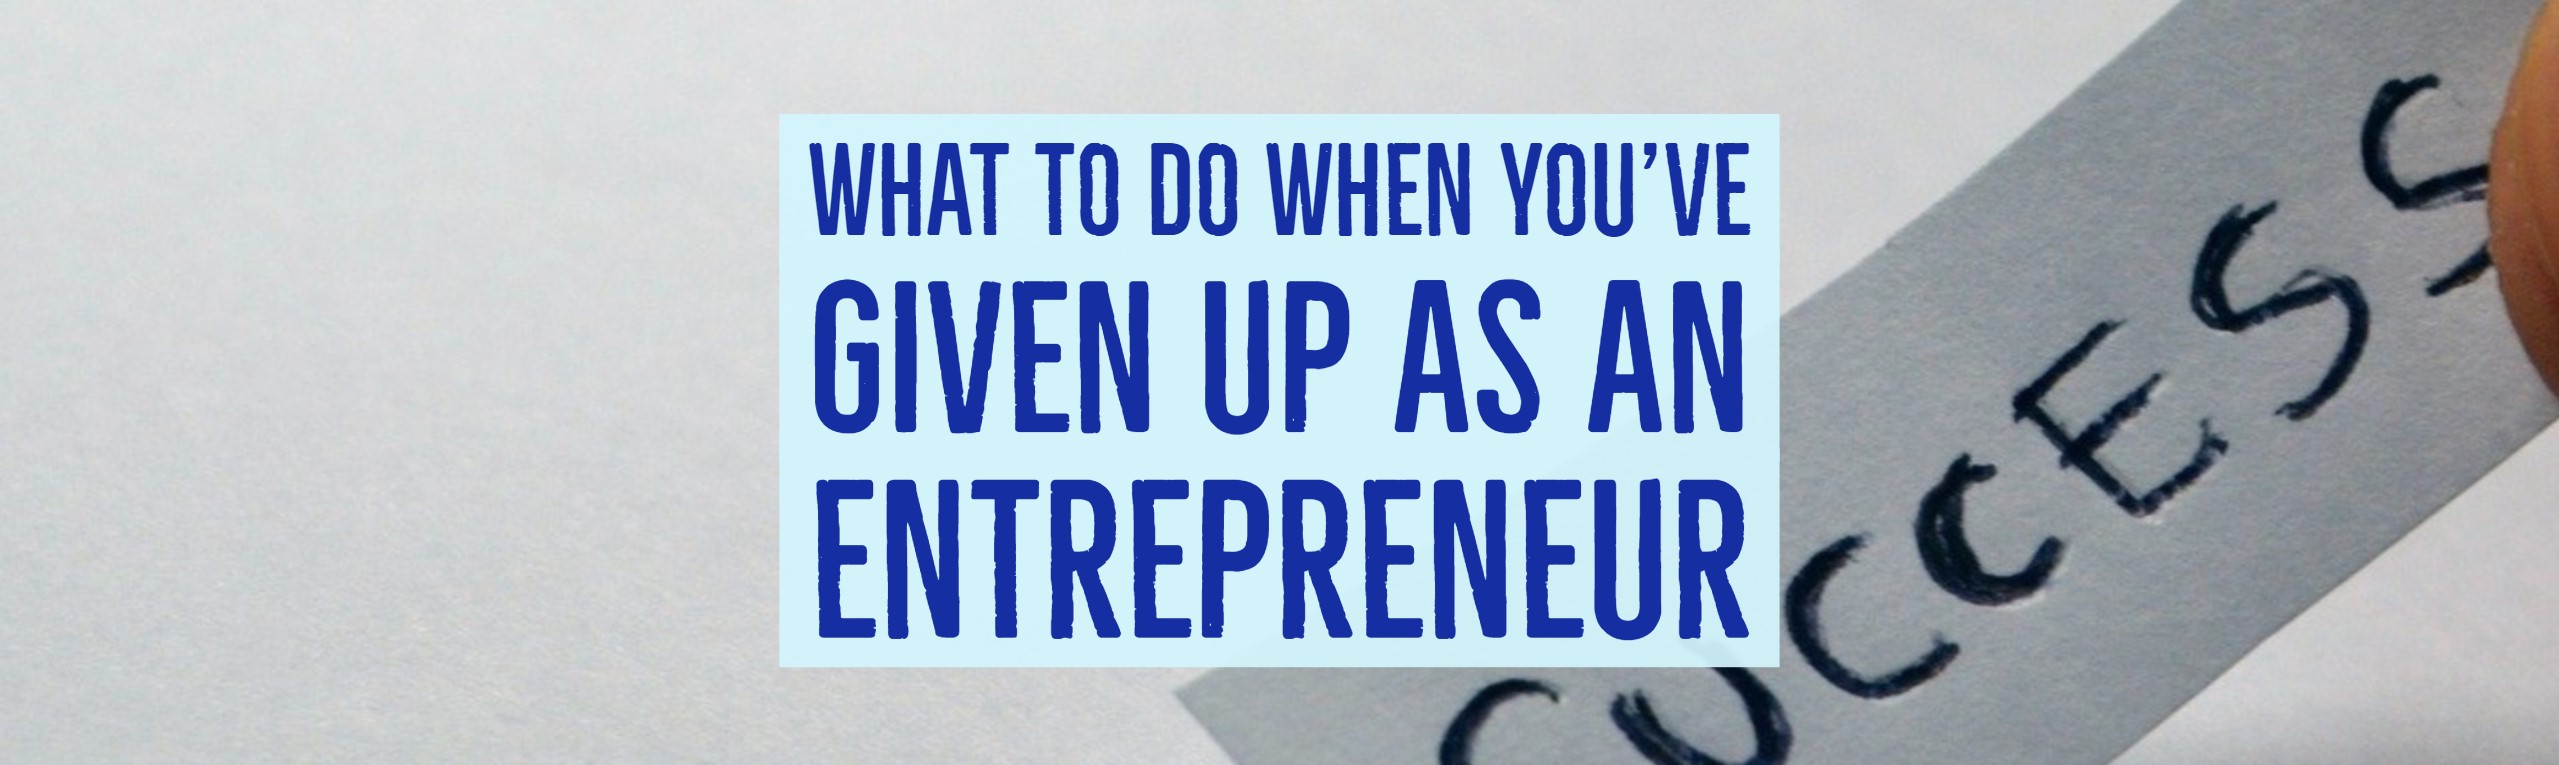 What to do when you have given up as an entrepreneur 